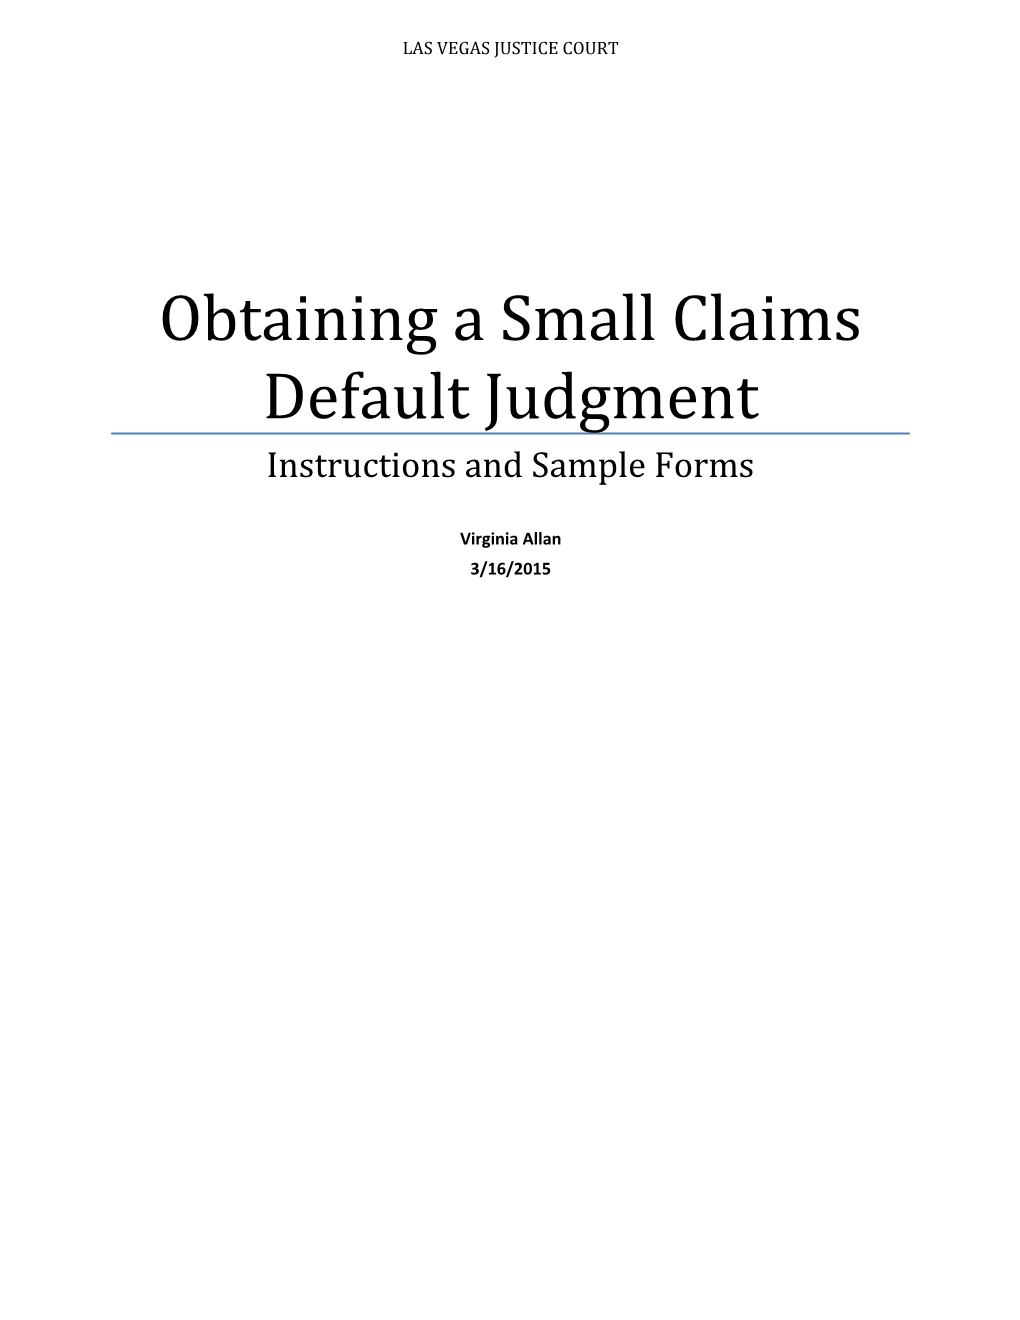 Obtaining a Small Claims Default Judgment